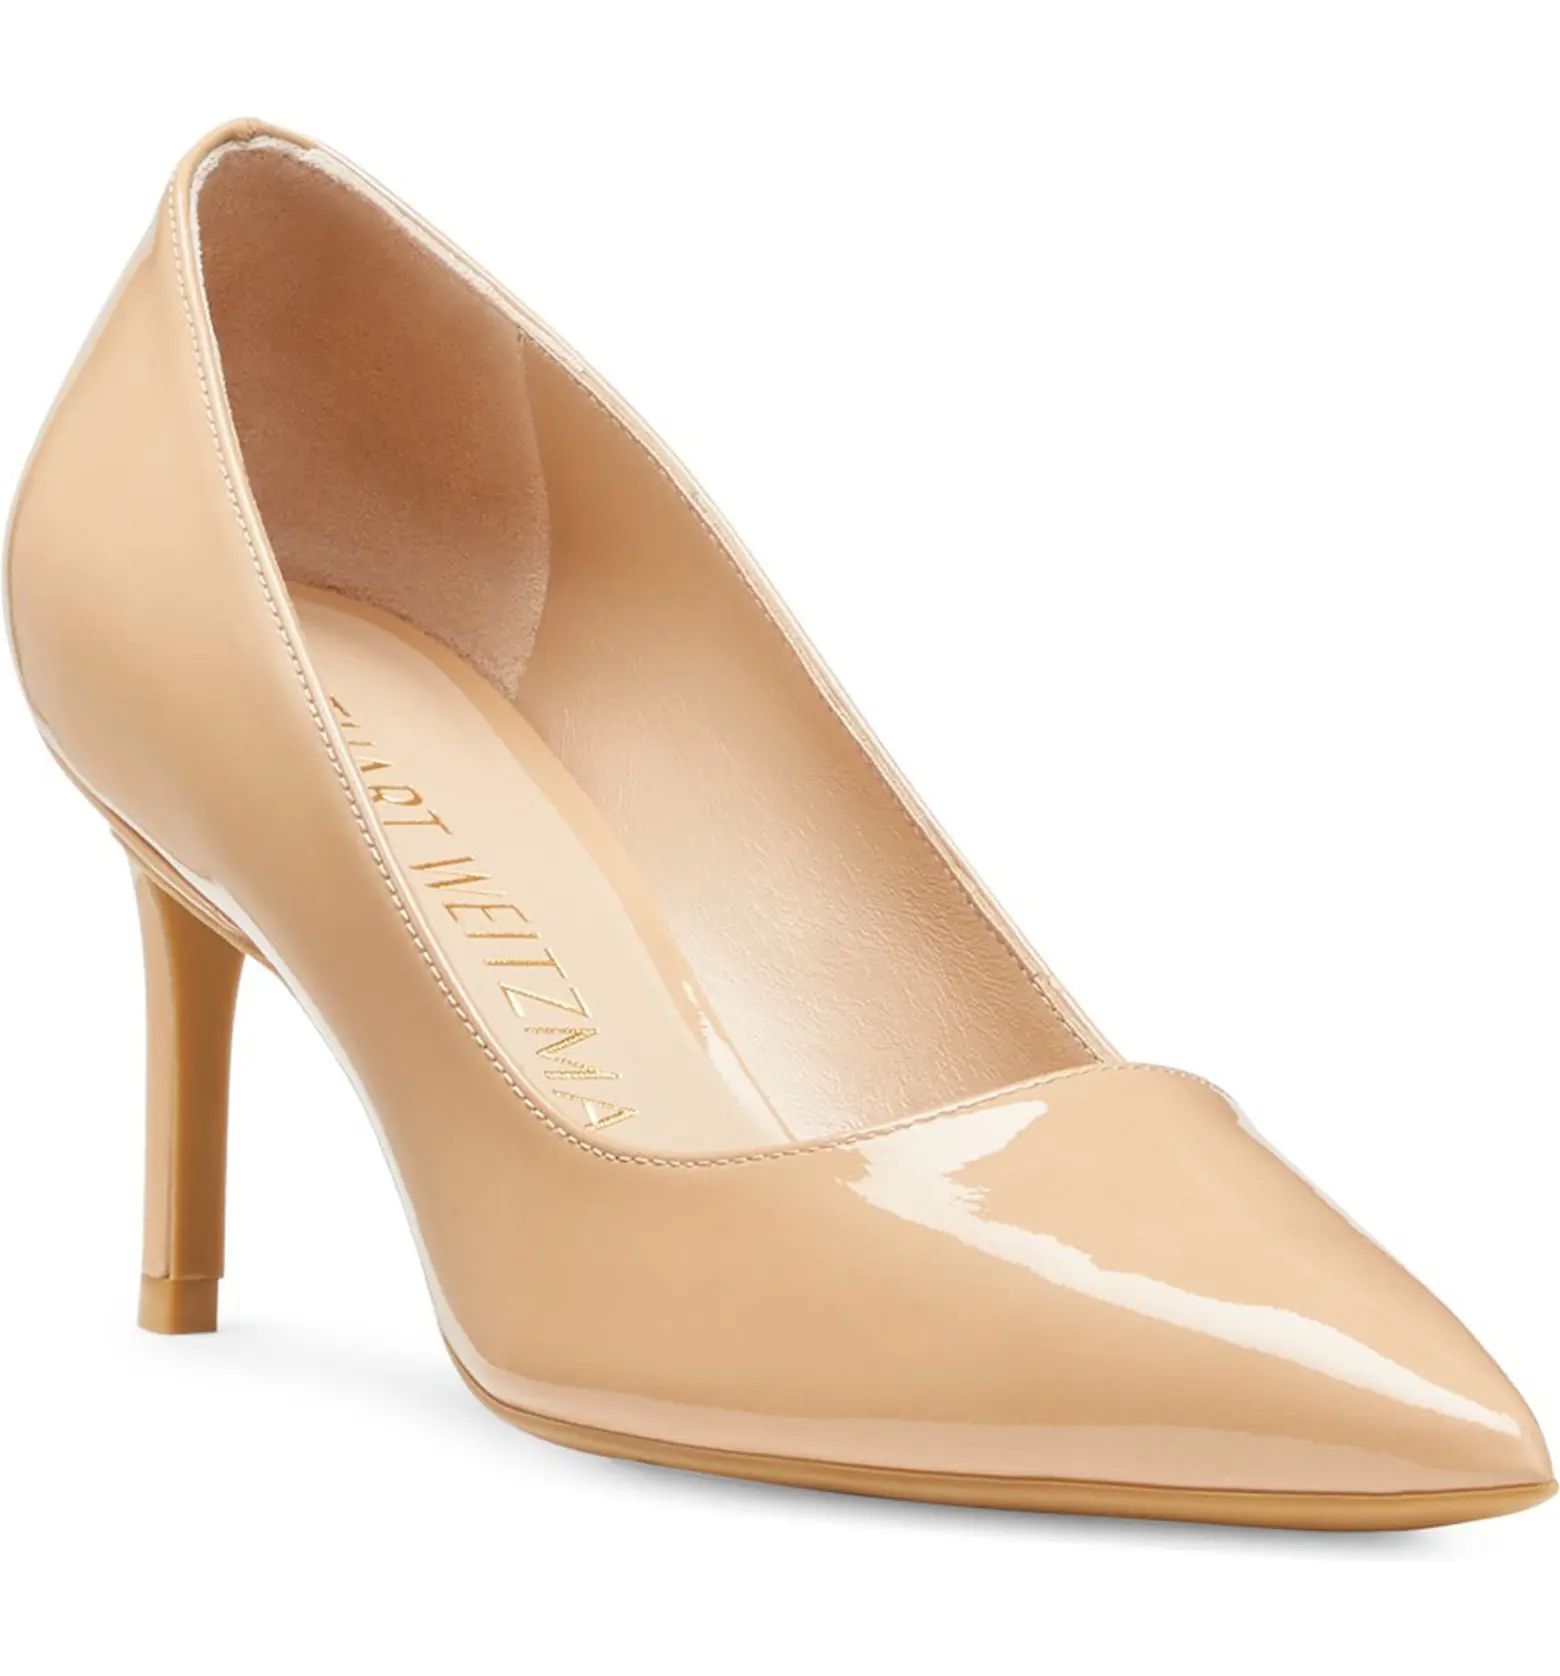 Linsi 75 Pointed Toe Pump (Women) | Nordstrom